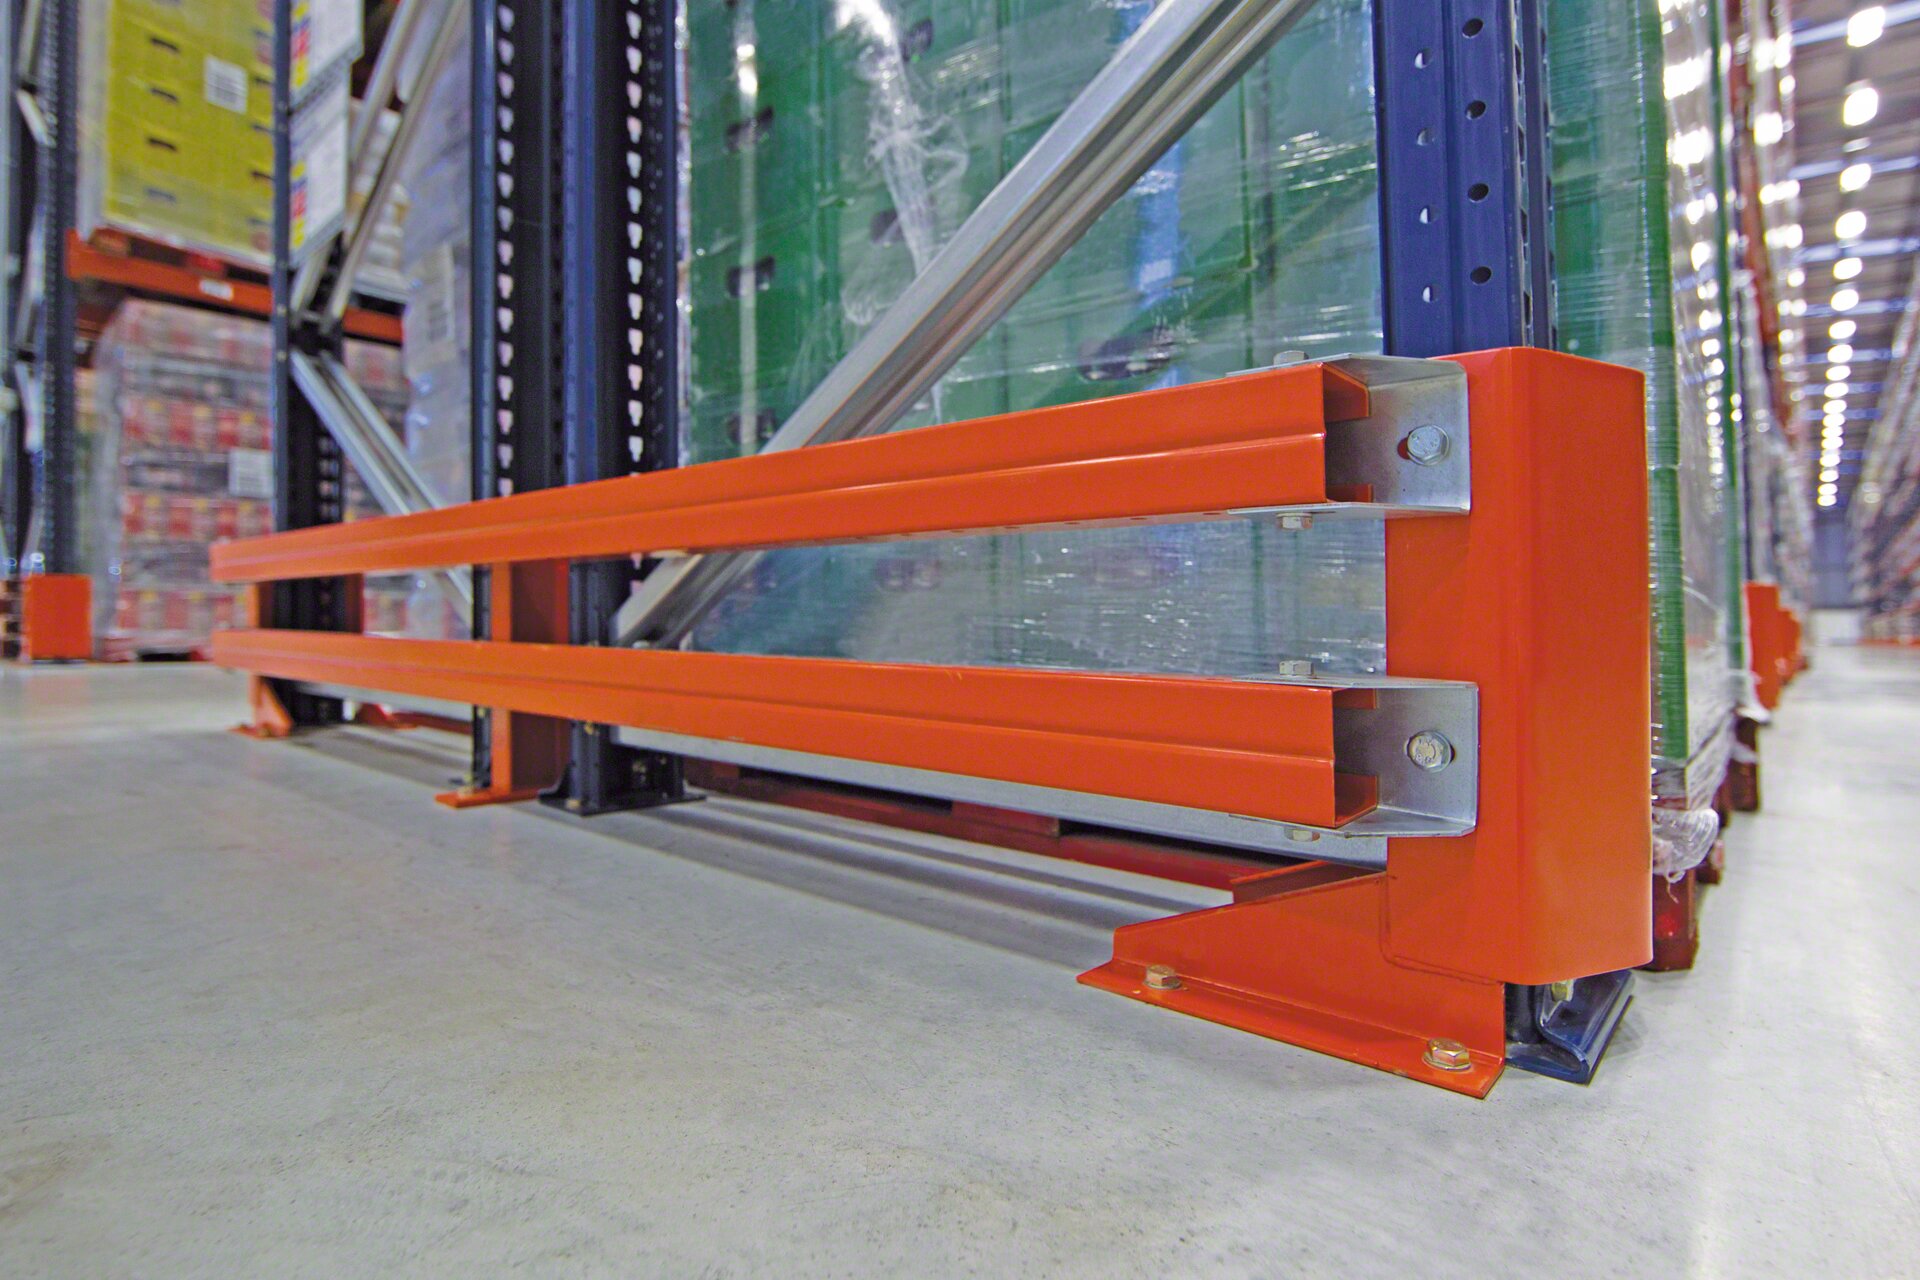 Protectors can be installed to prevent damage to the rack from handling equipment impact